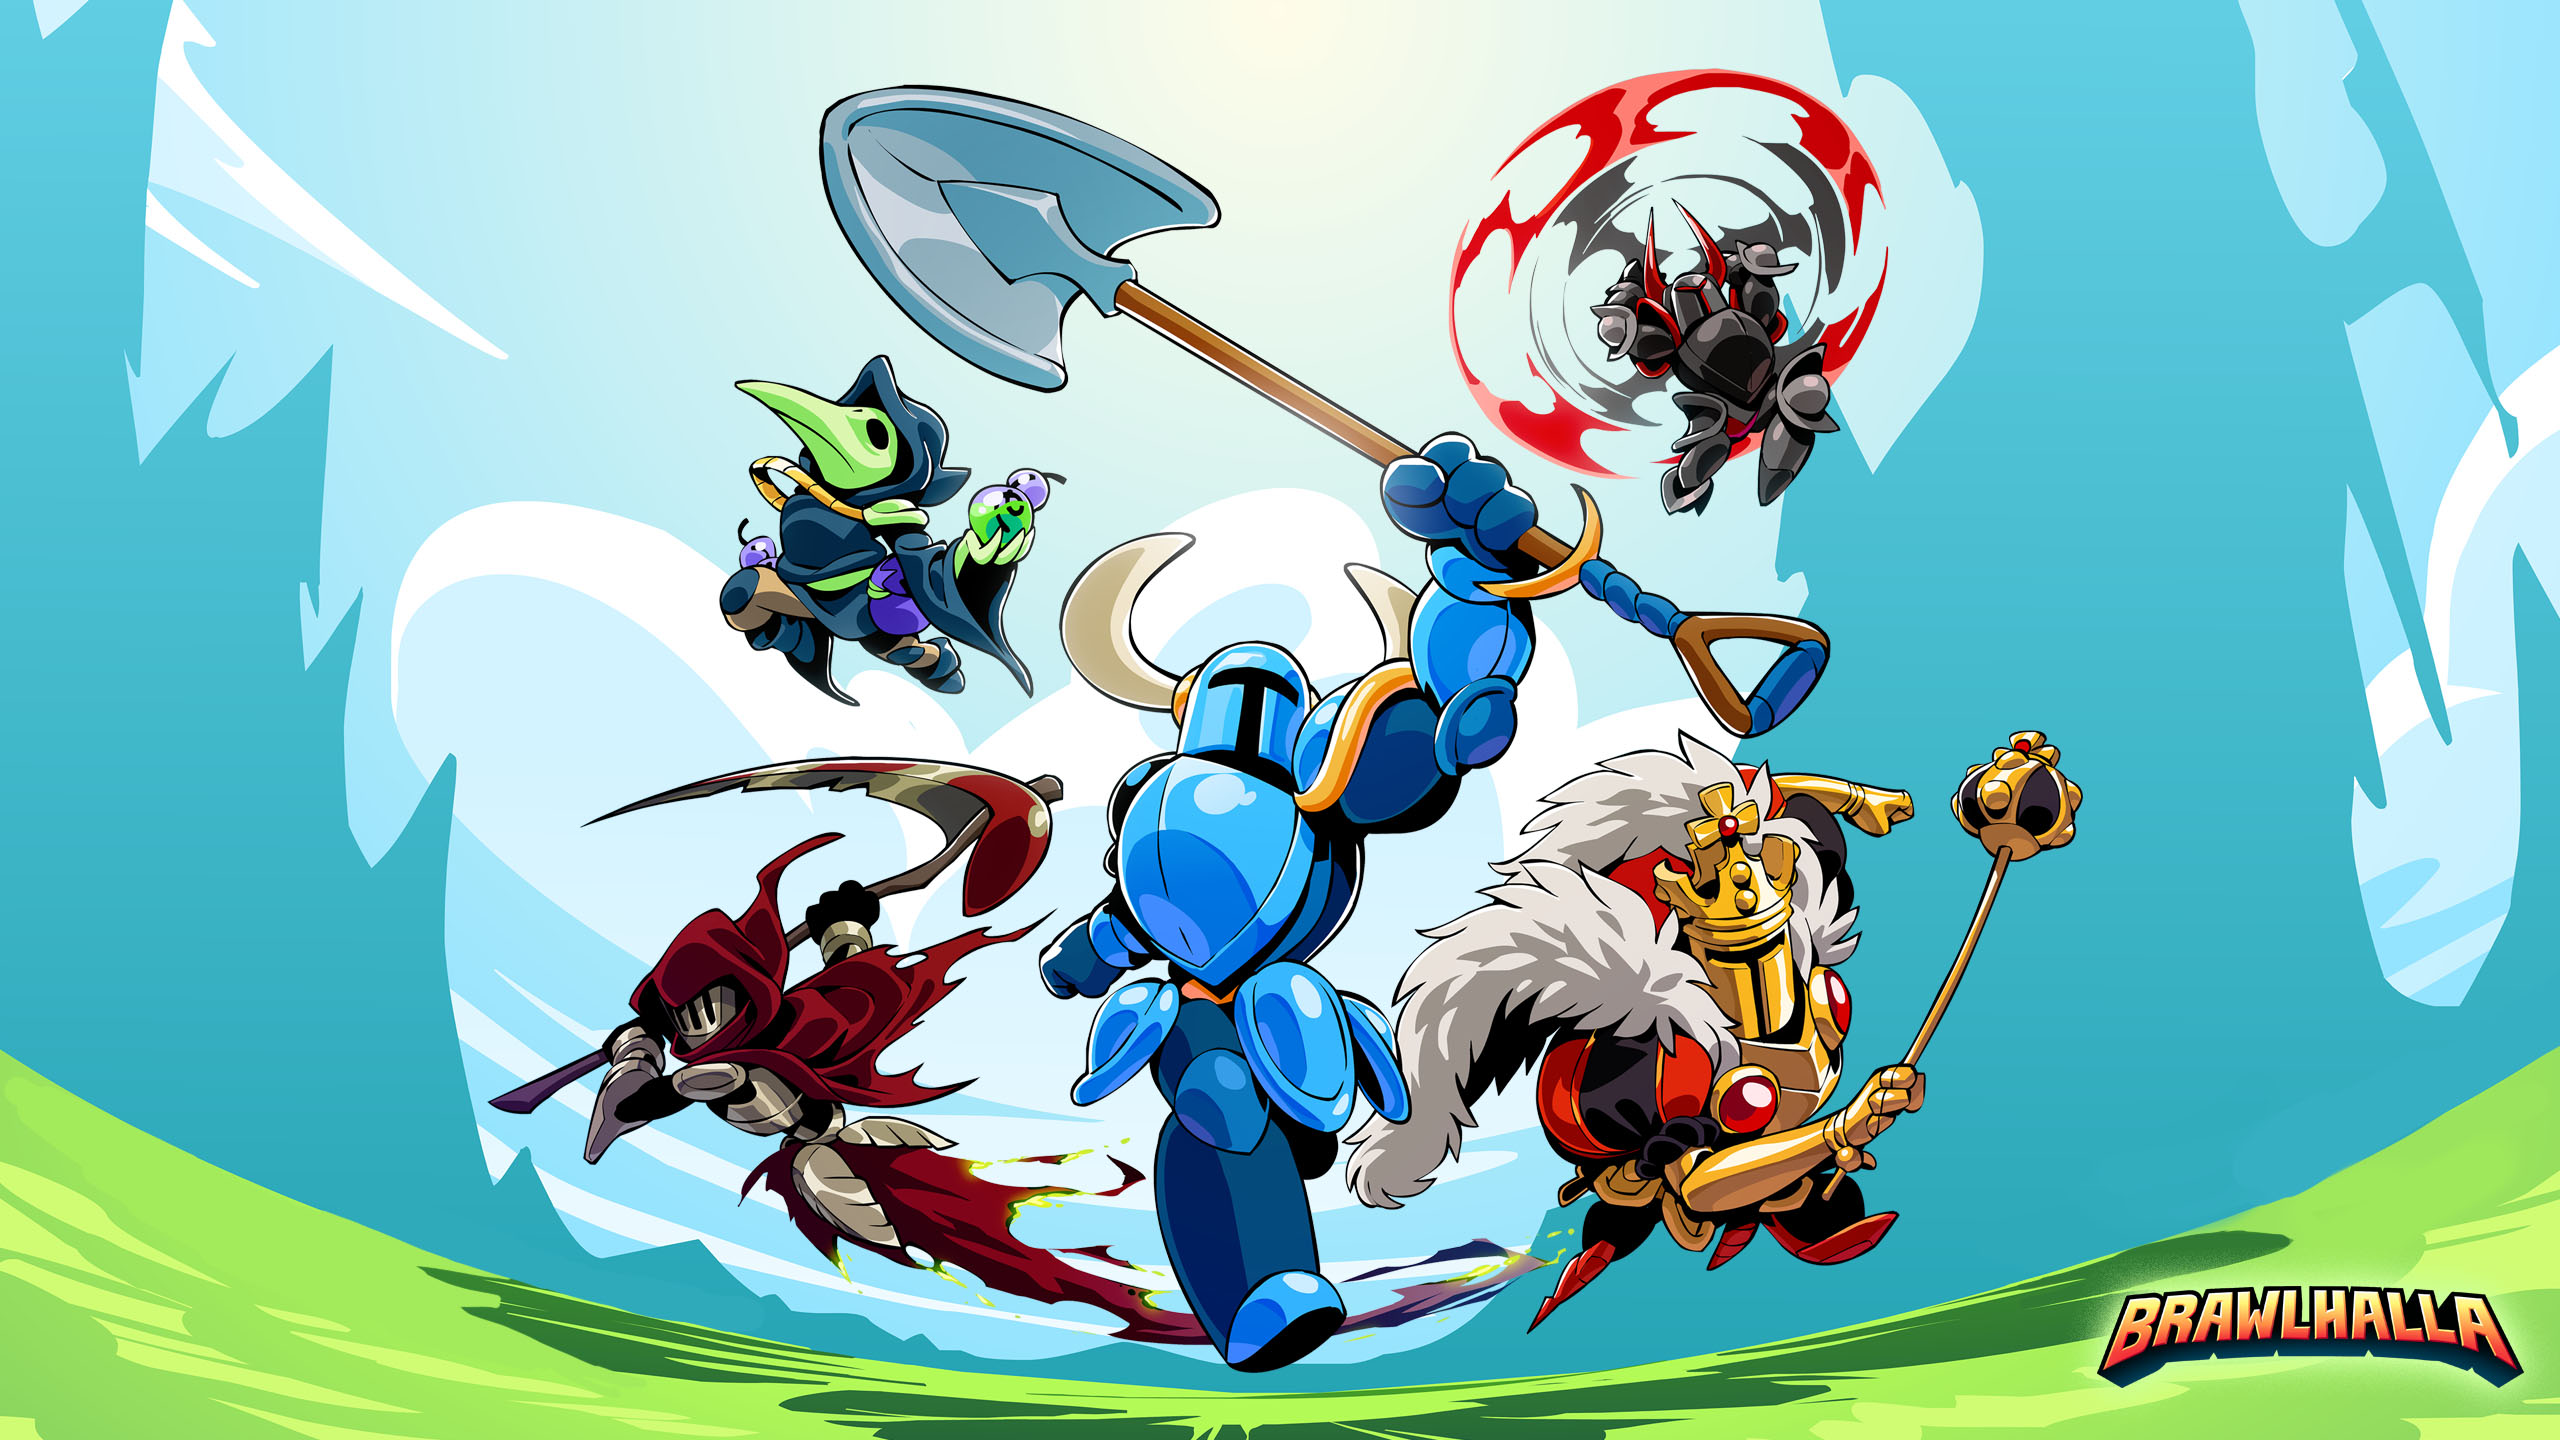 General 2560x1440 Brawlhalla game posters Shovel Knight video games Ubisoft